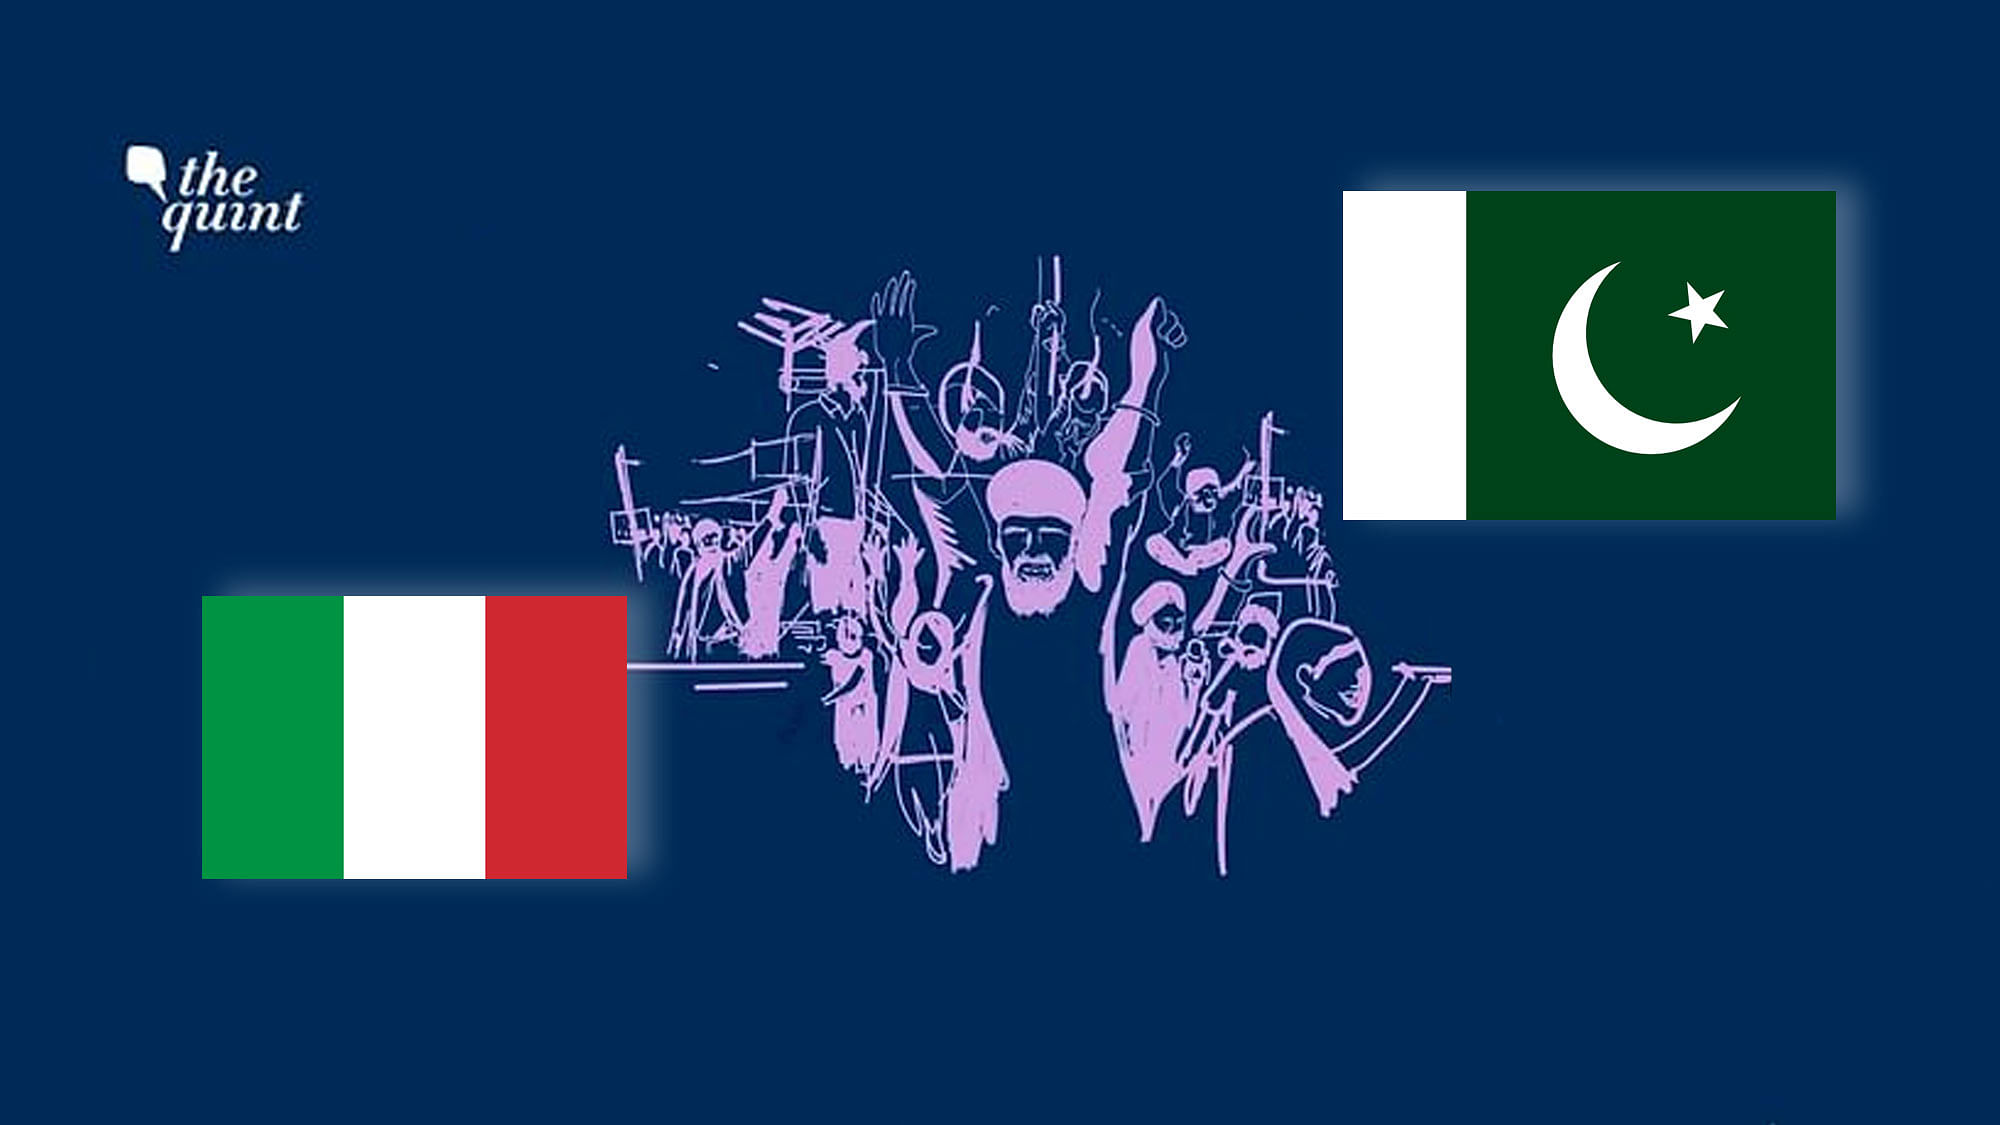 Flag of Italy (L), flag of Pakistan (R), and illustration depicting Sikh extremists used for representational purposes.